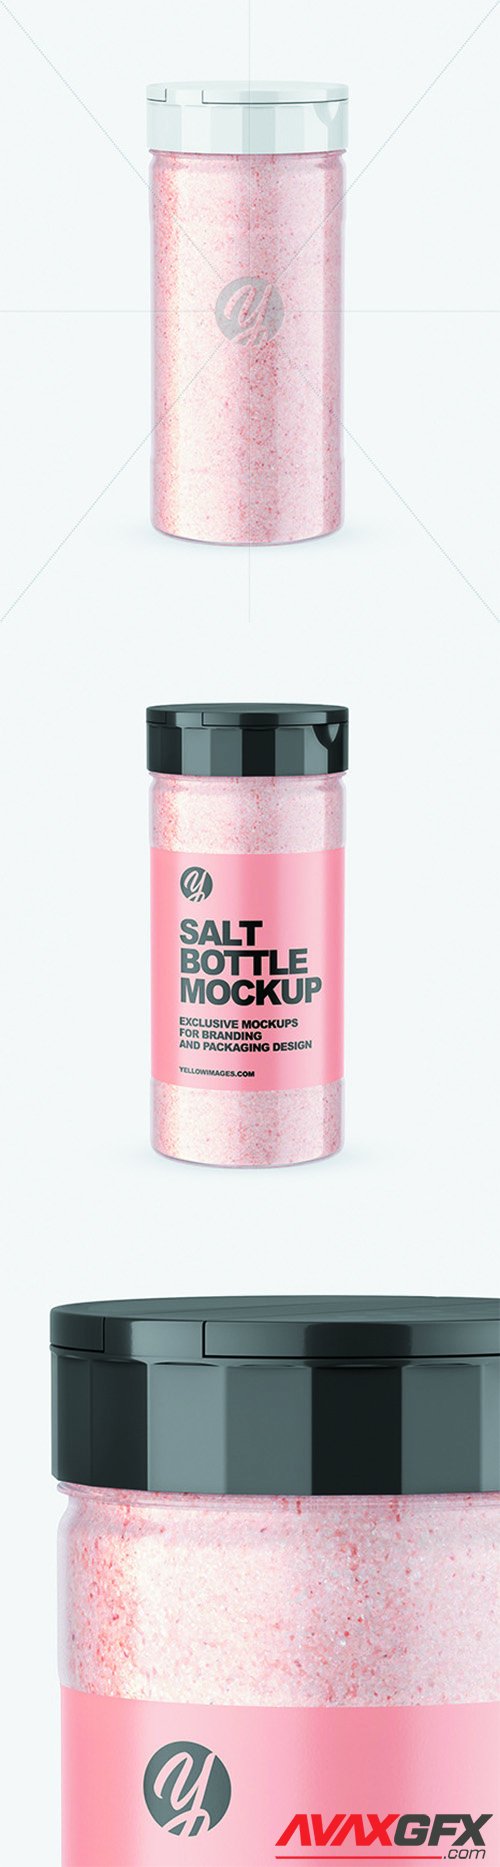 Download Pink Salt Mill Mockup 39678 Tif Avaxgfx All Downloads That You Need In One Place Graphic From Nitroflare Rapidgator